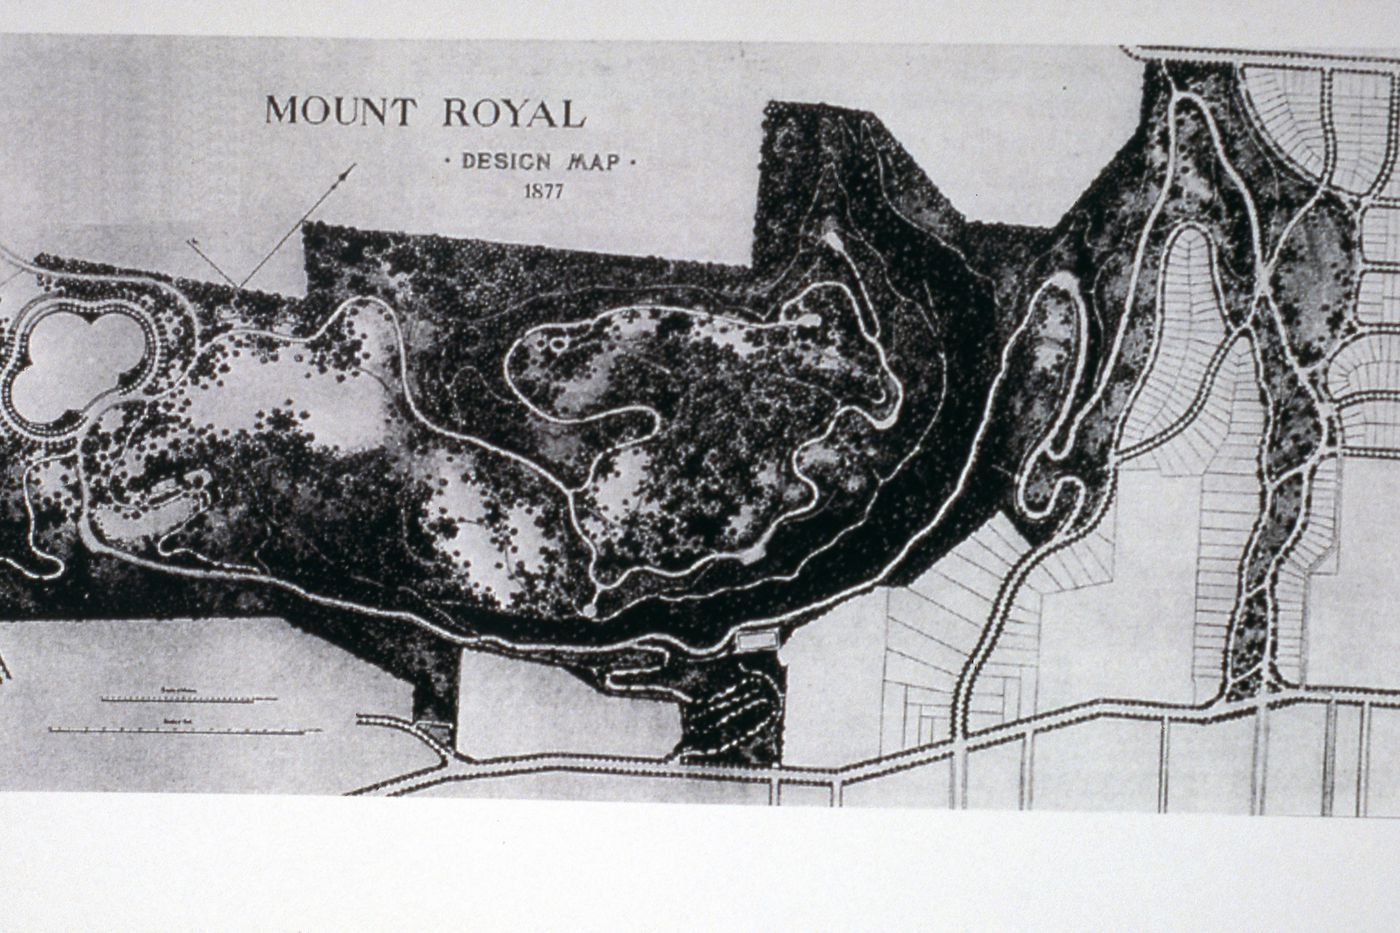 Photograph of plan of Mount Royal Park for research for Olmsted: L'origine del parco urbano e del parco naturale contemporaneo